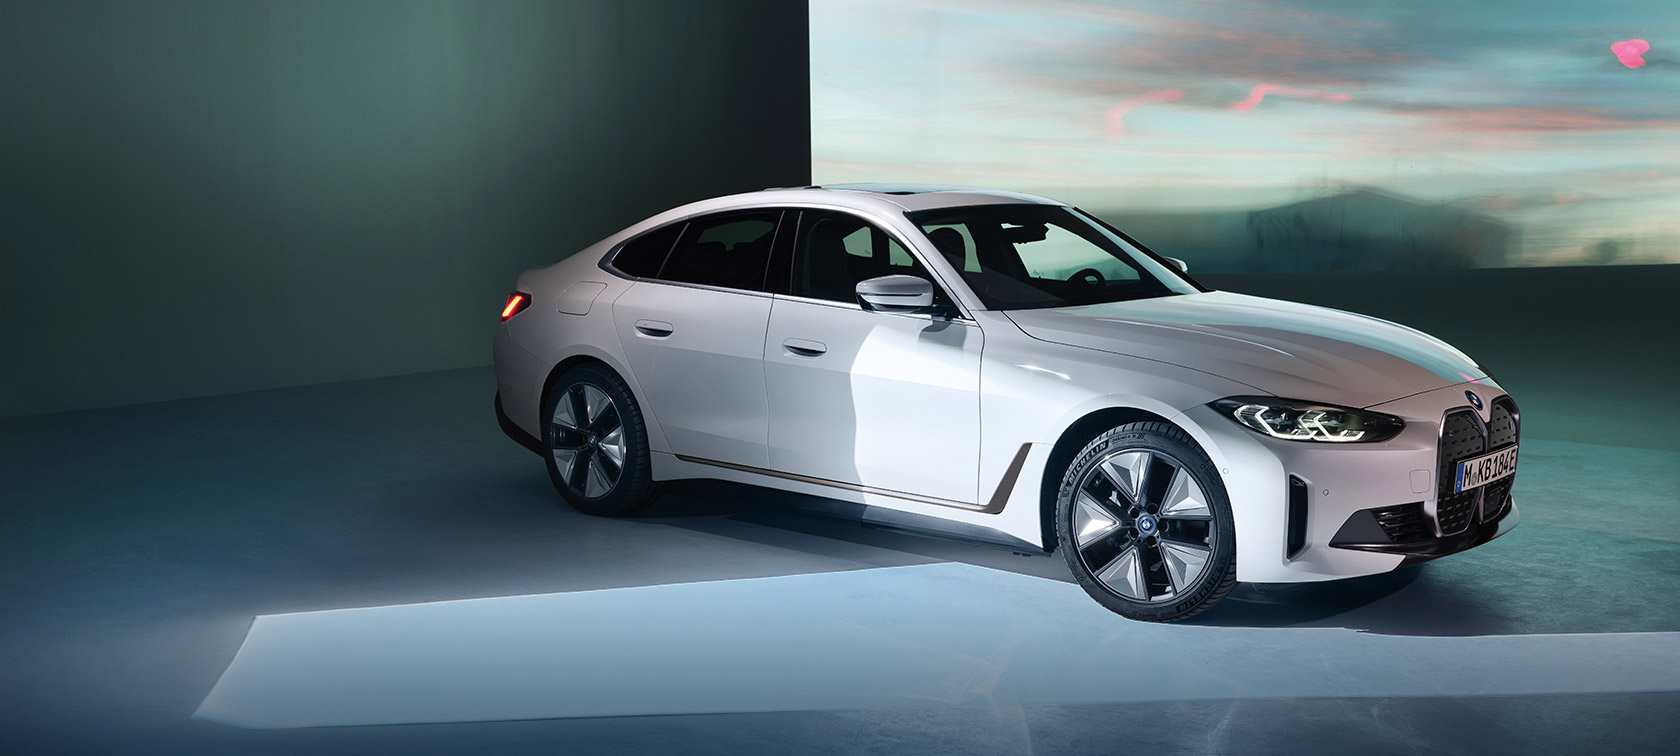 THE FIRST-EVER FULLY-ELECTRIC BMW i4